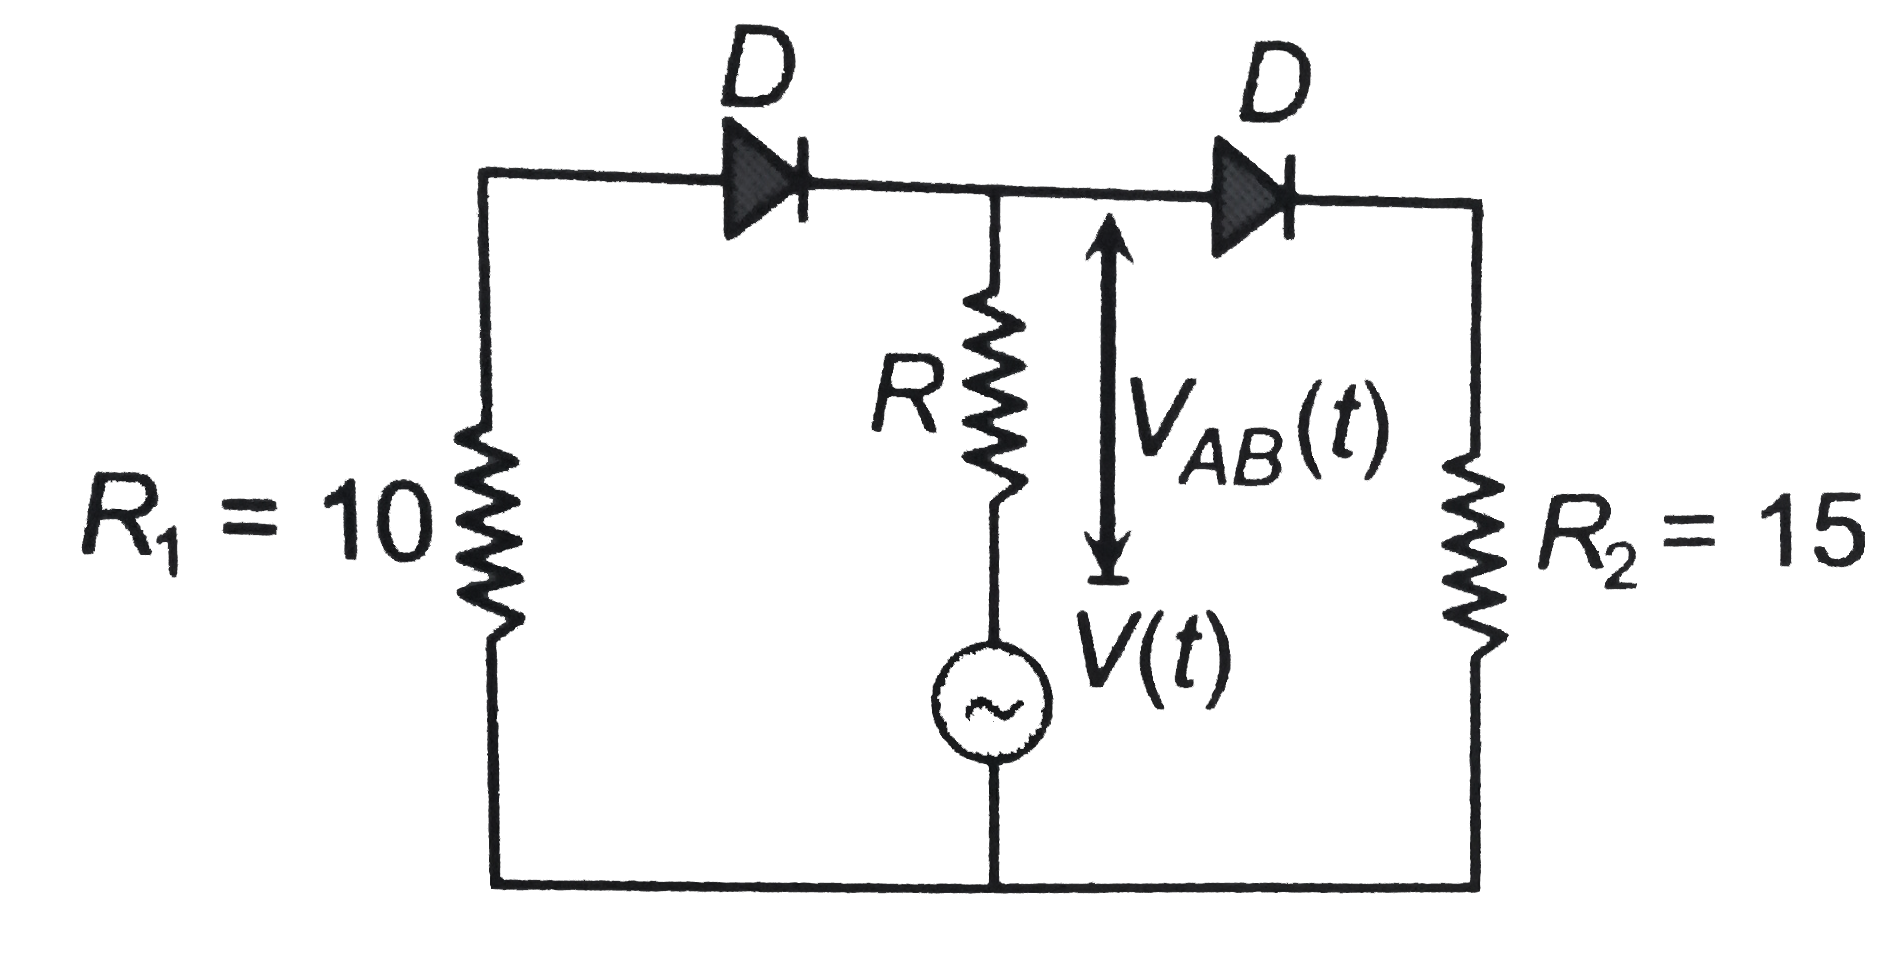 In the circuit given below, V(t) is the sinusoidal voltage source, voltage drop V(AB)(t) across the resistance R is